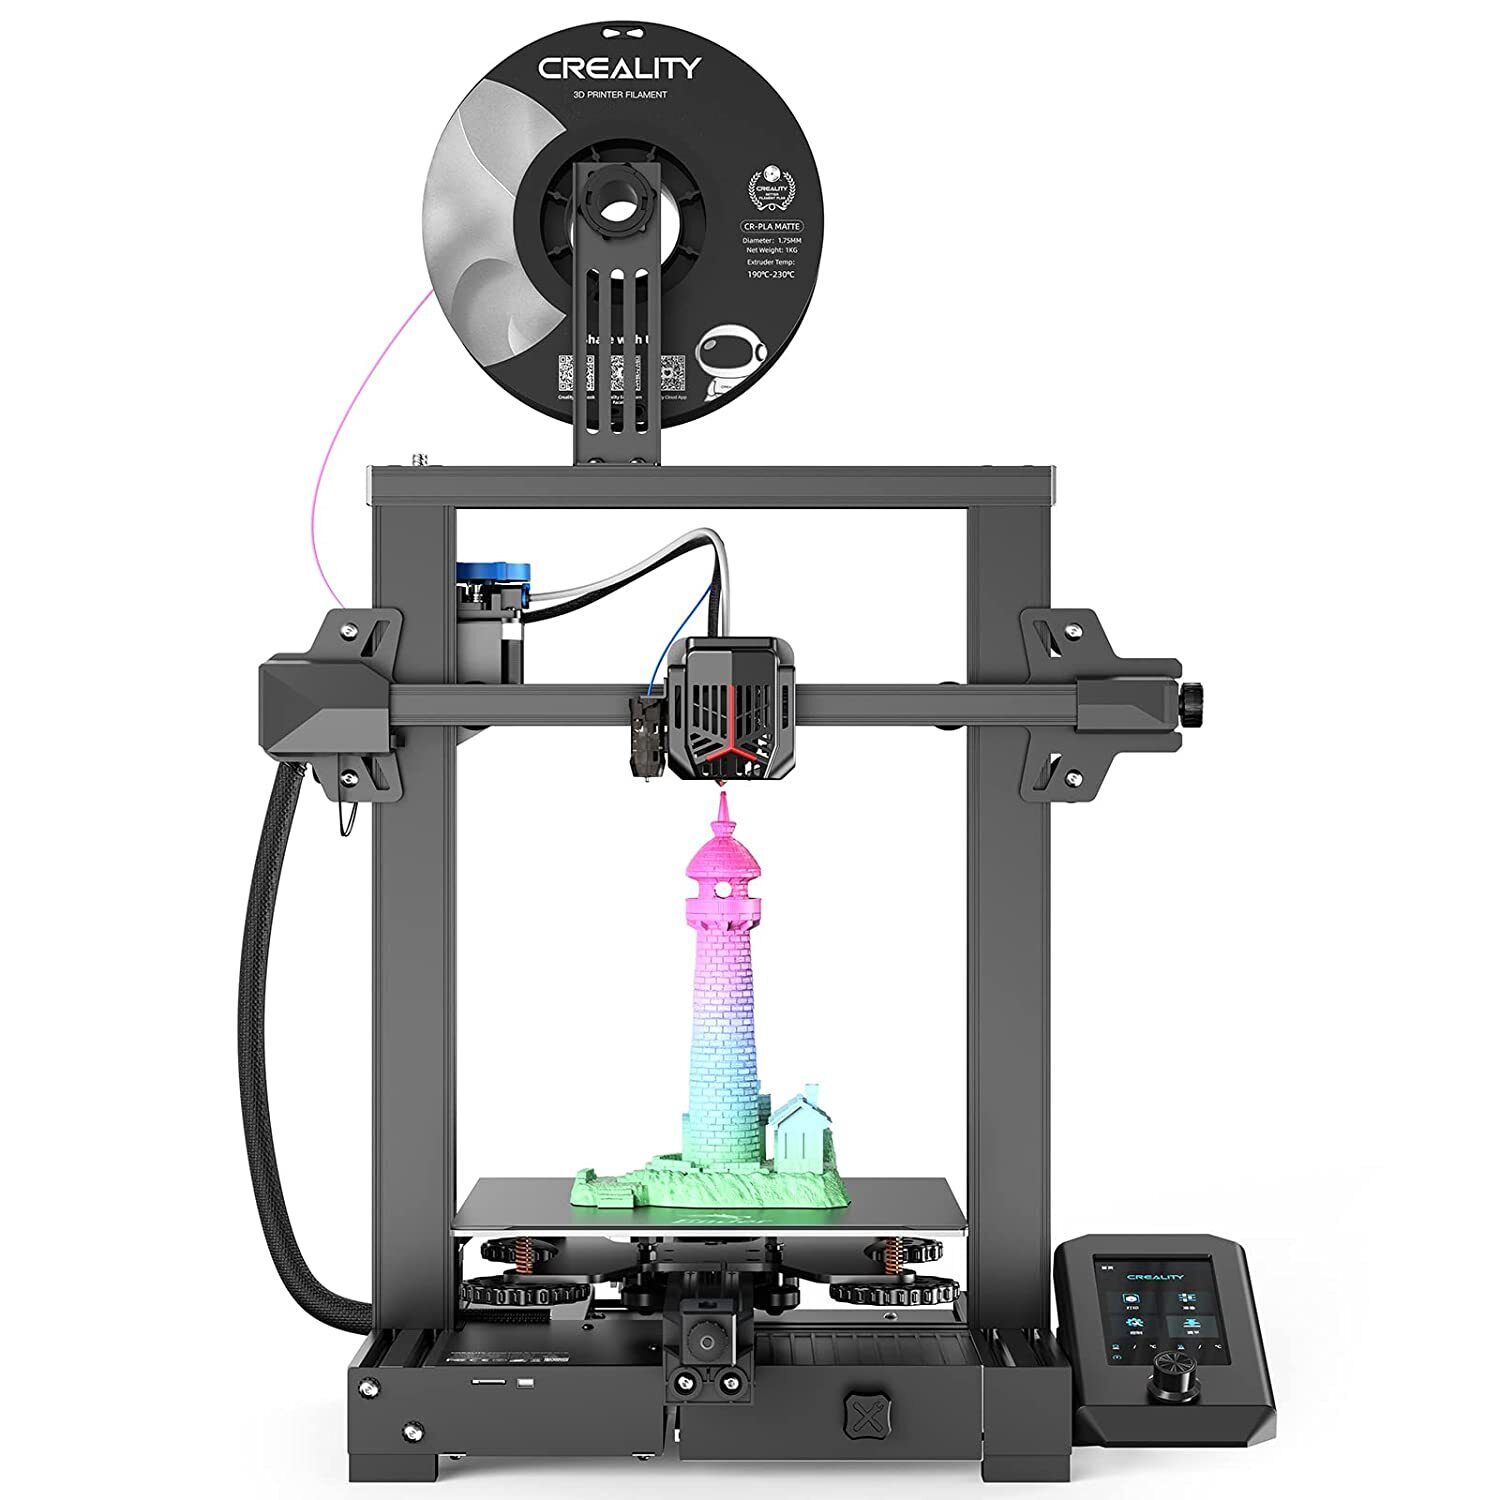 Refurbished Creality Ender 3 V2 Neo 3D Printer CR Touch Auto Level 220*220*250mm